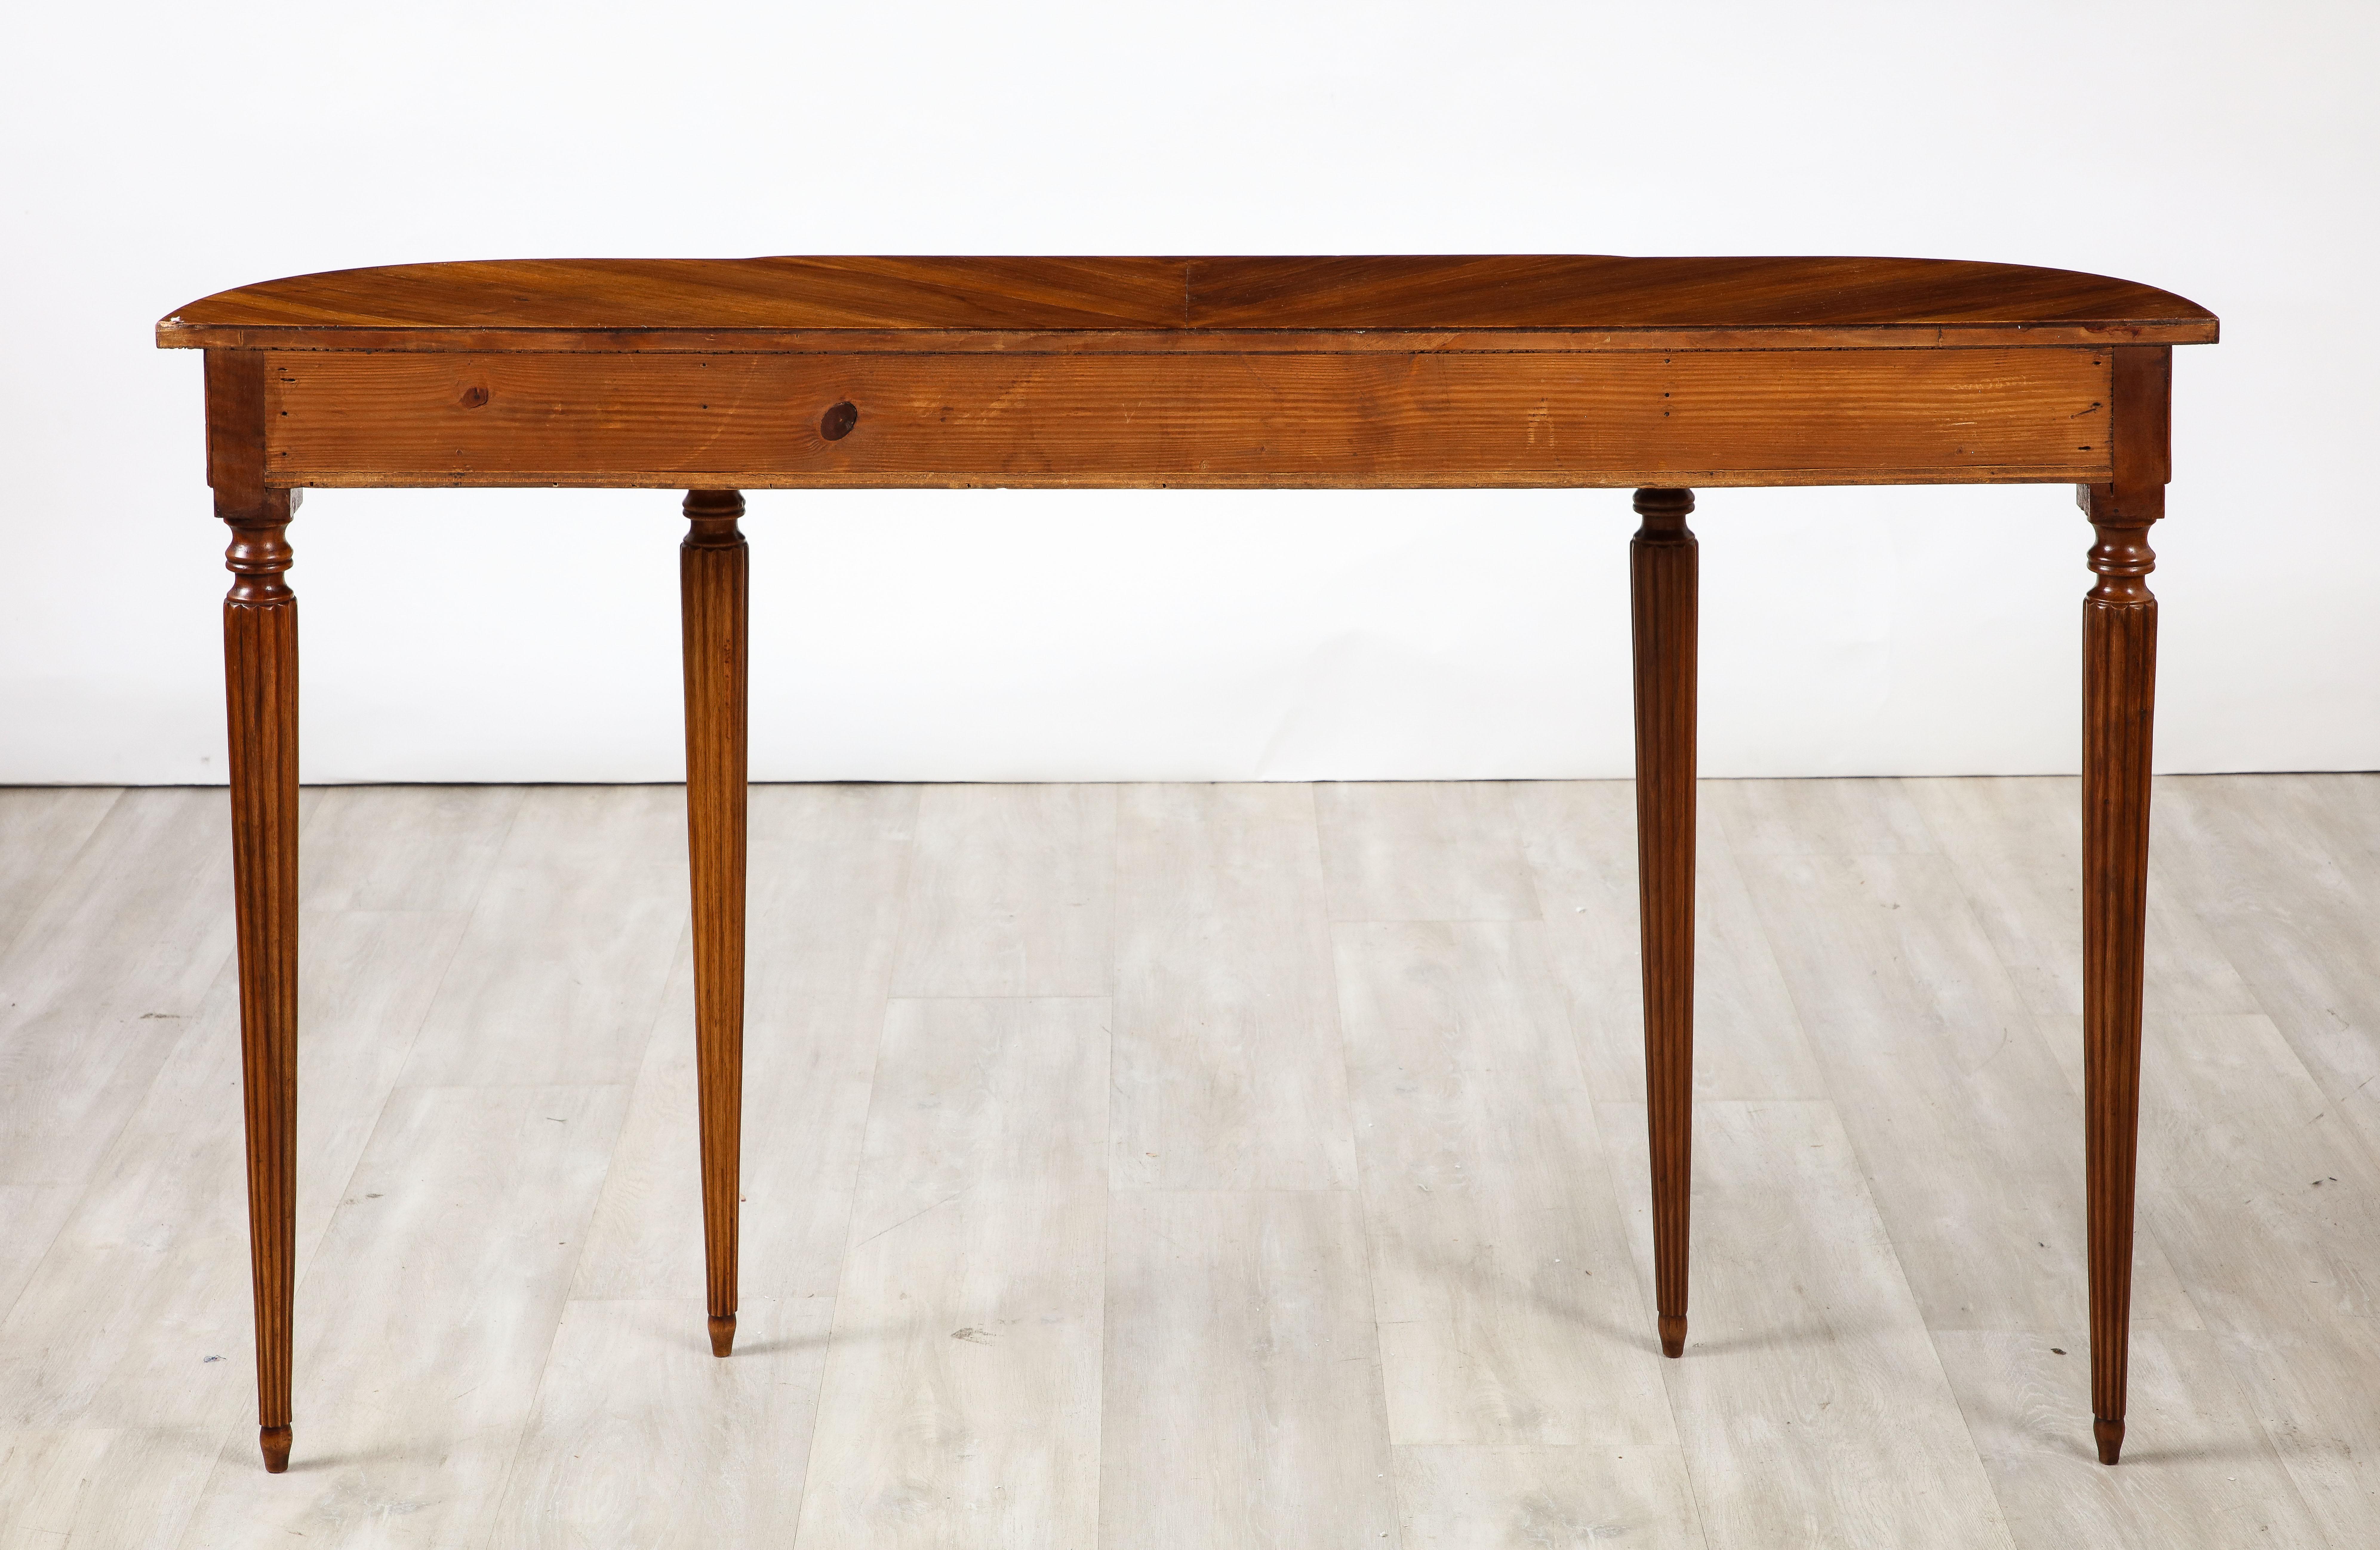 Mid-20th Century Italian Walnut Carved Console Table with Two Drawers, Italy circa 1930 For Sale